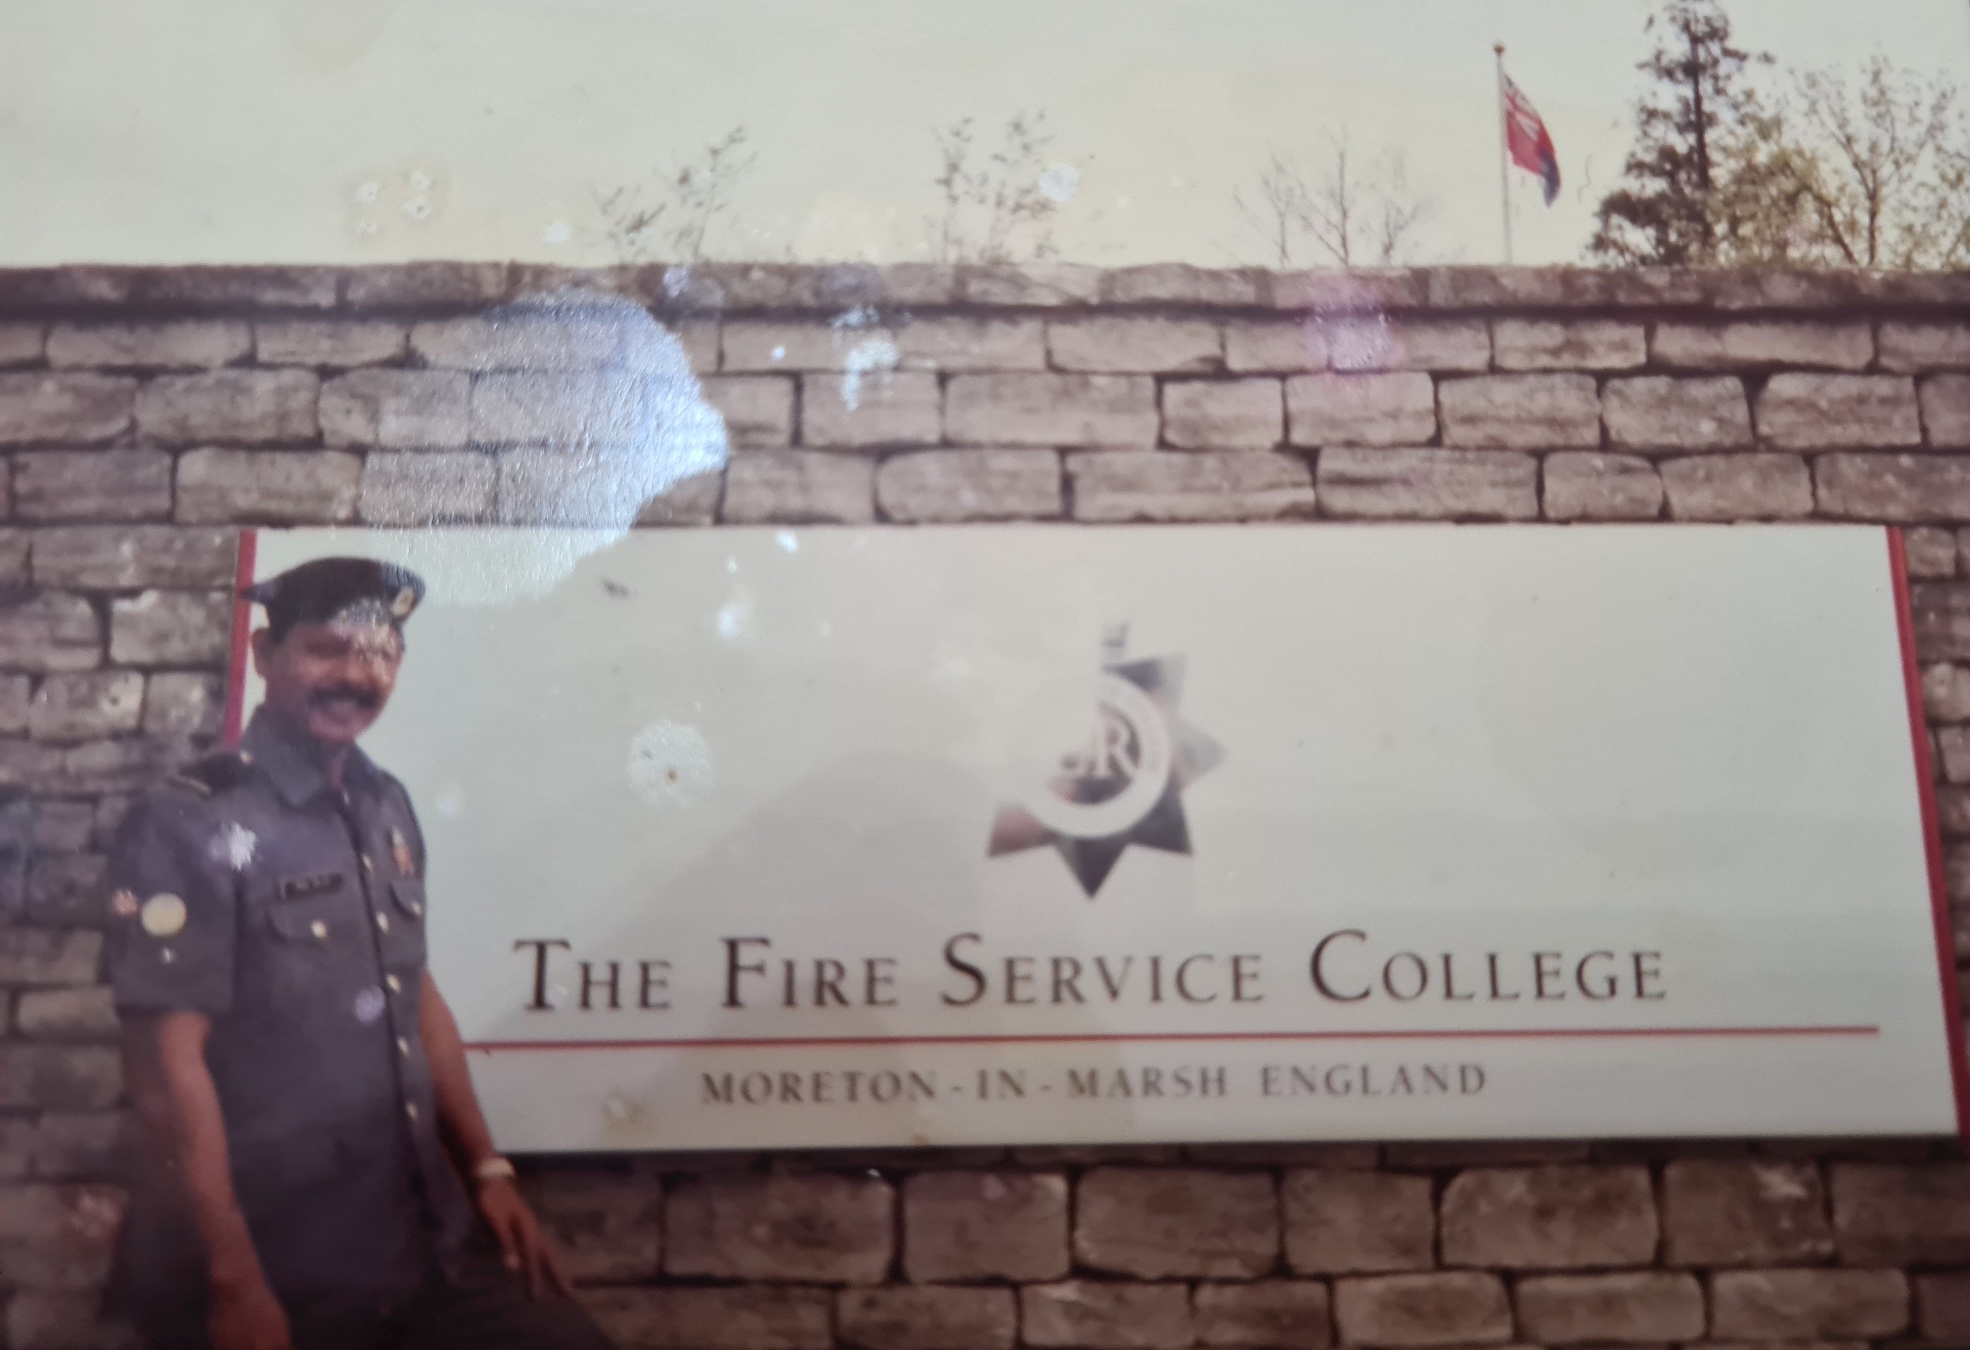 SWO (RET) Md Salleh at the Fire Service College, Moreton-in-Marsh, United Kingdom, from 29 March to 17 April 1992.